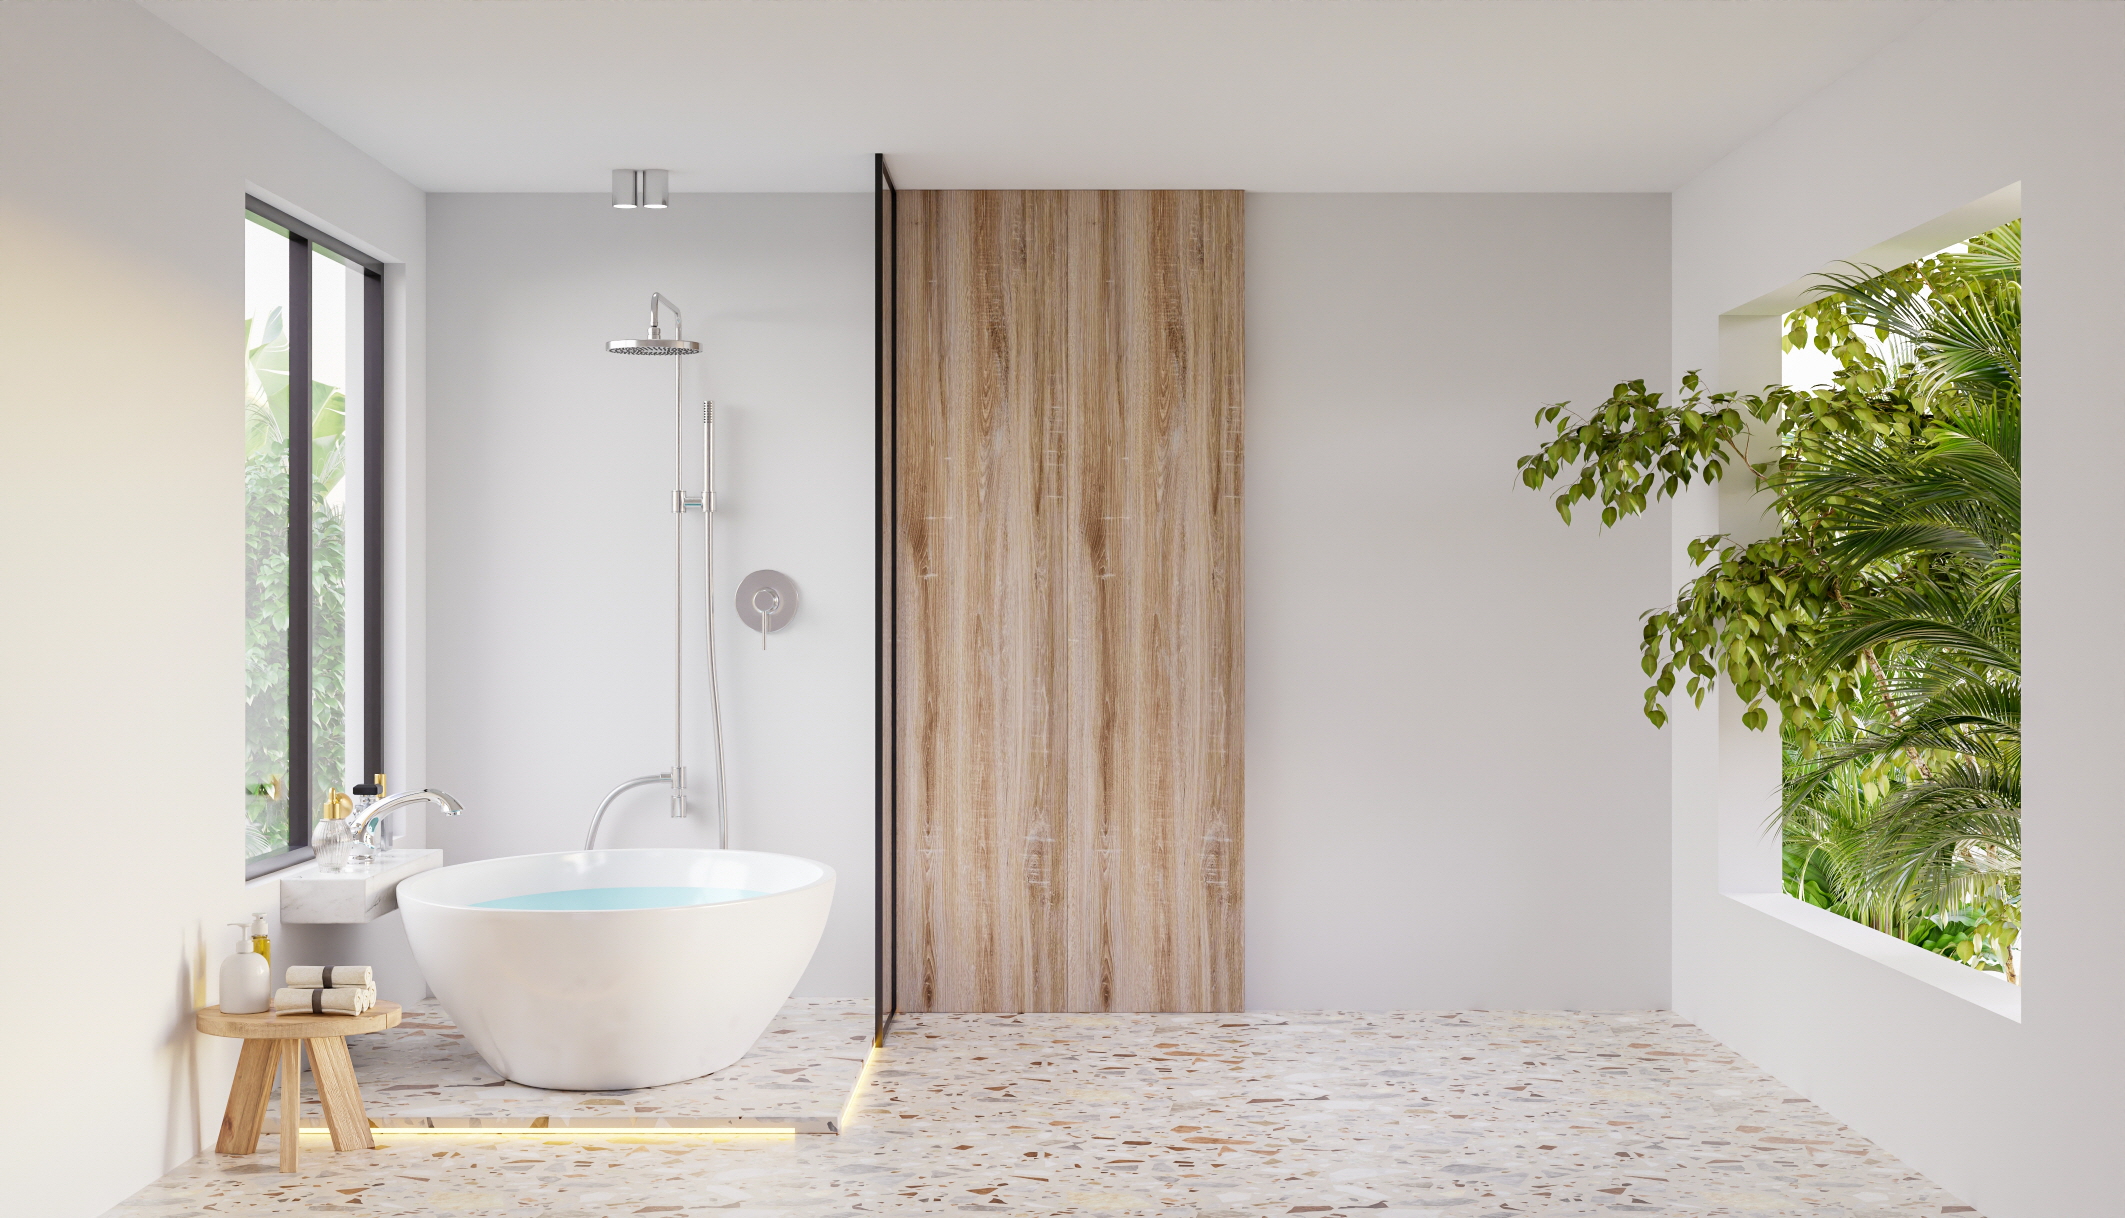 Infuse your bathroom with Zen tranquility using natural materials, minimalist fixtures, and soothing colors for a serene space.